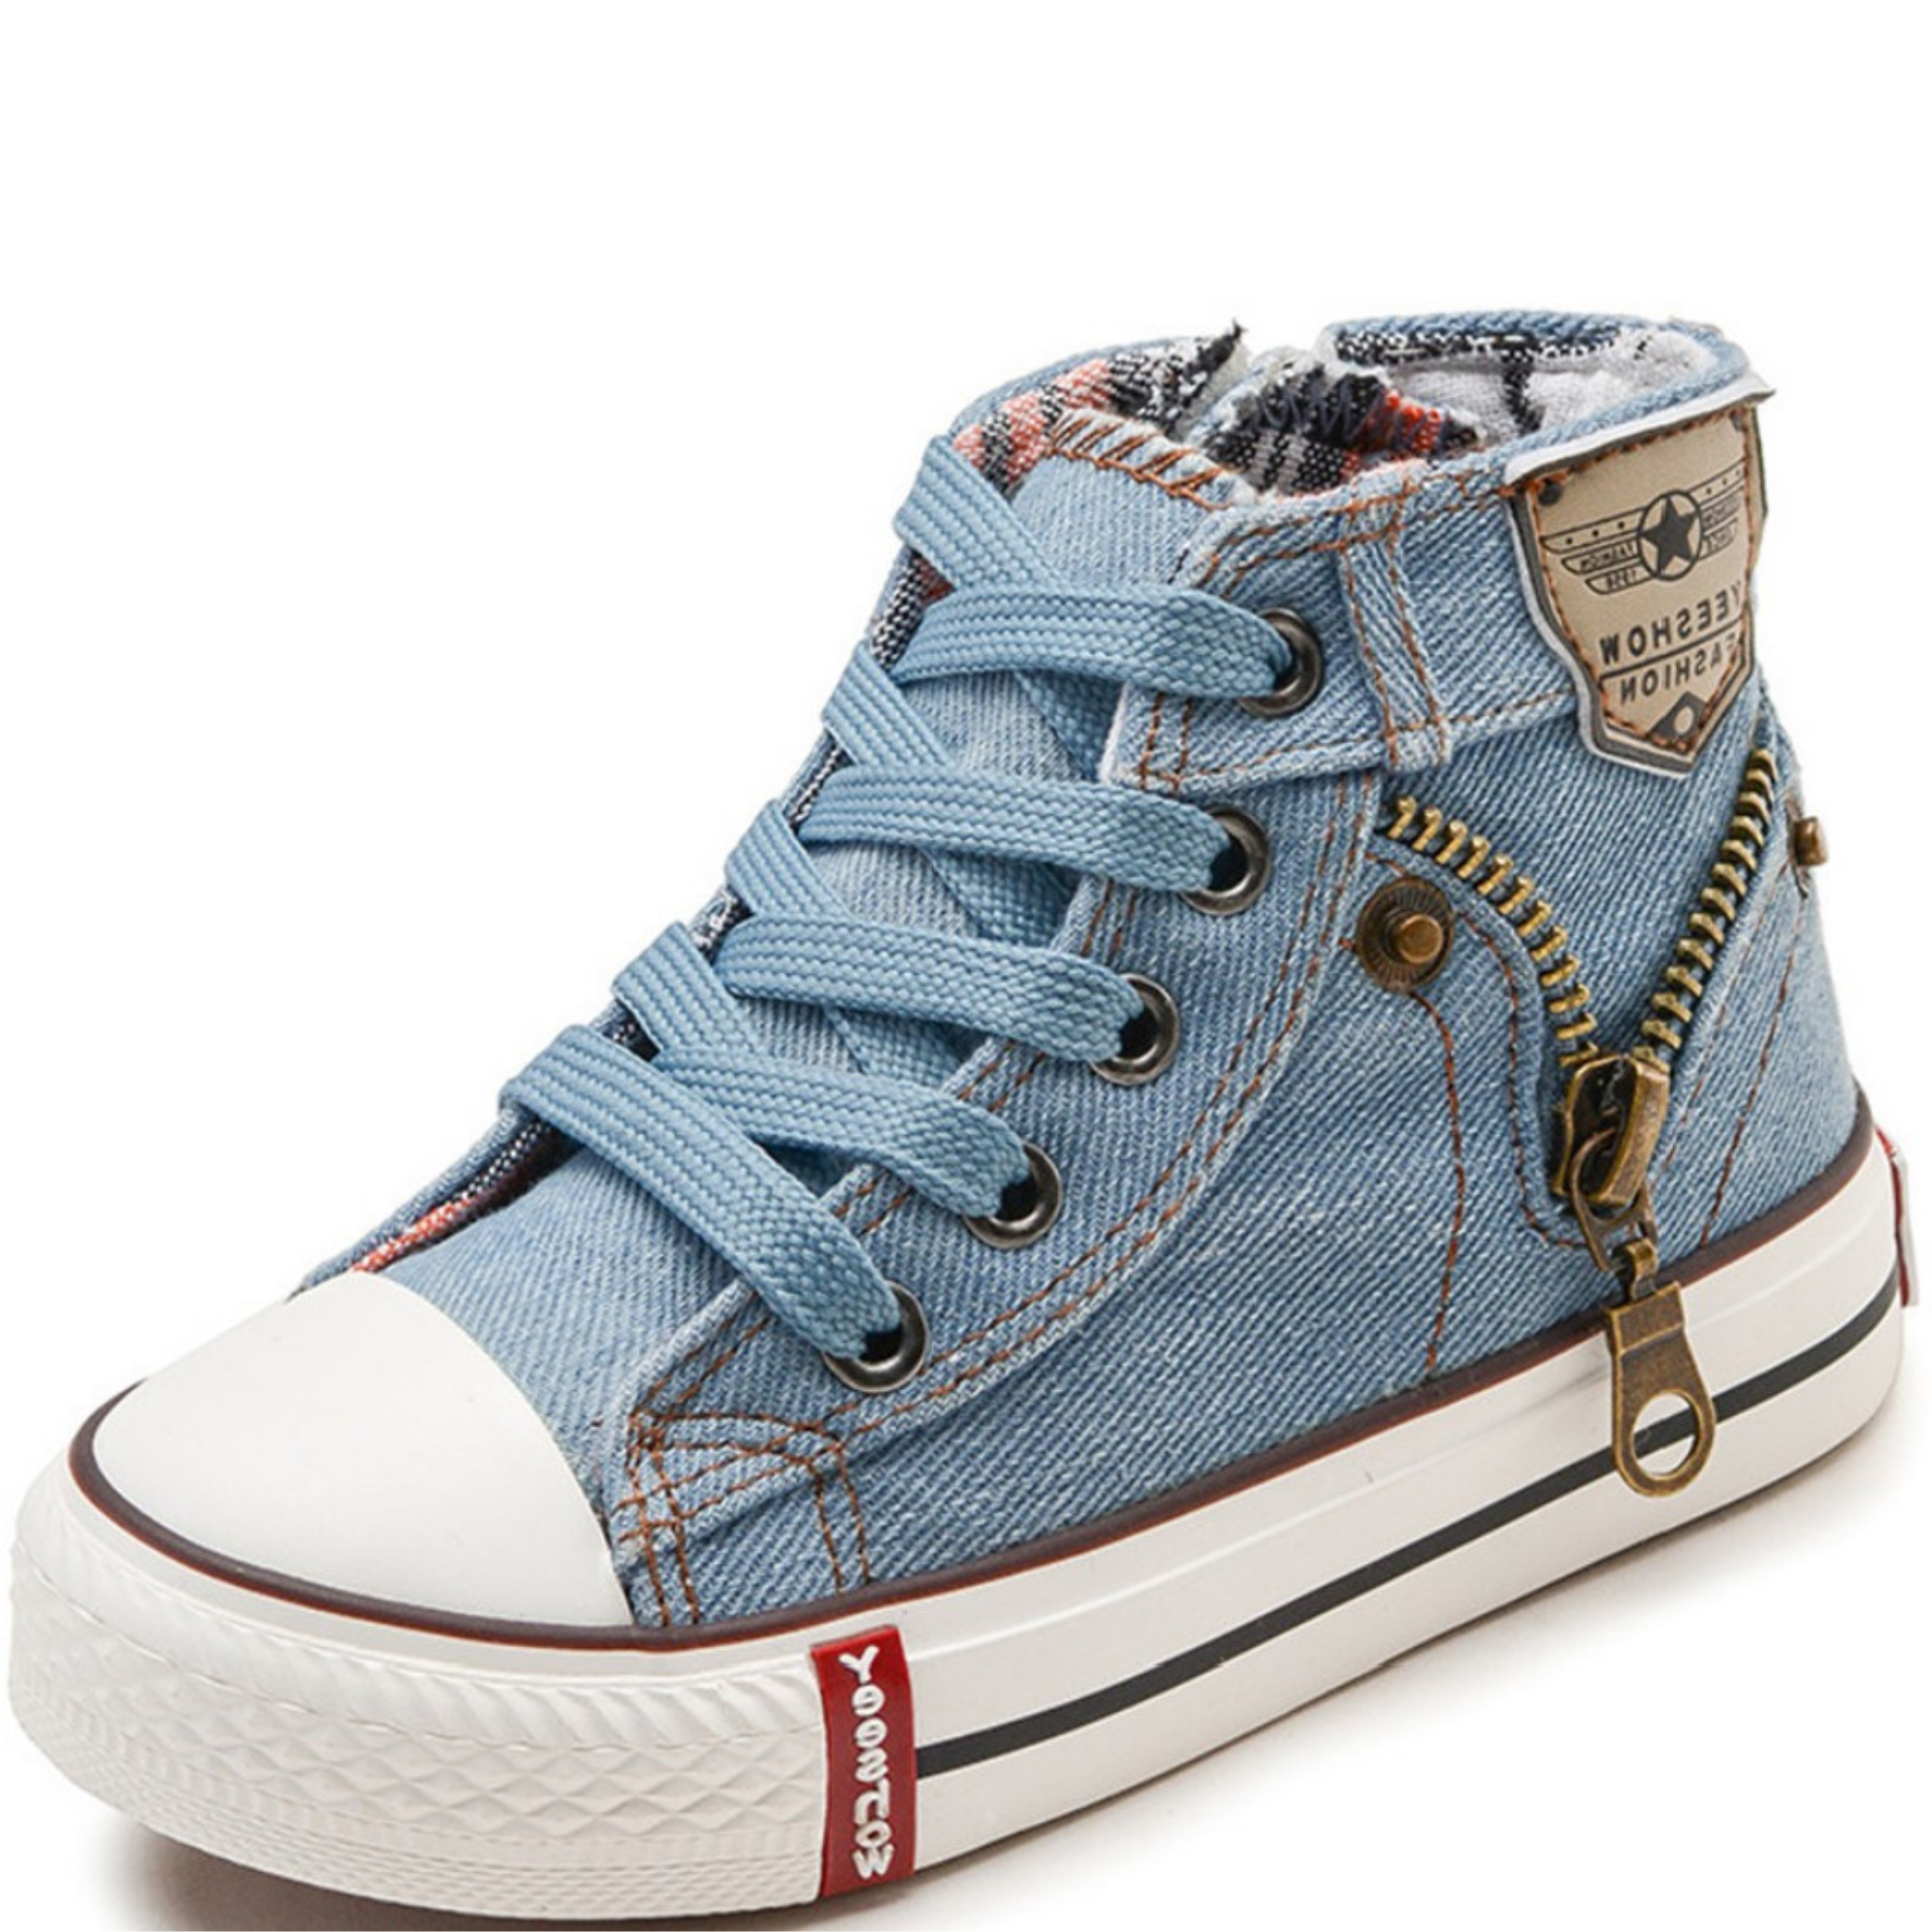 Toddler denim style high tops NAVY OR PALE BLUE